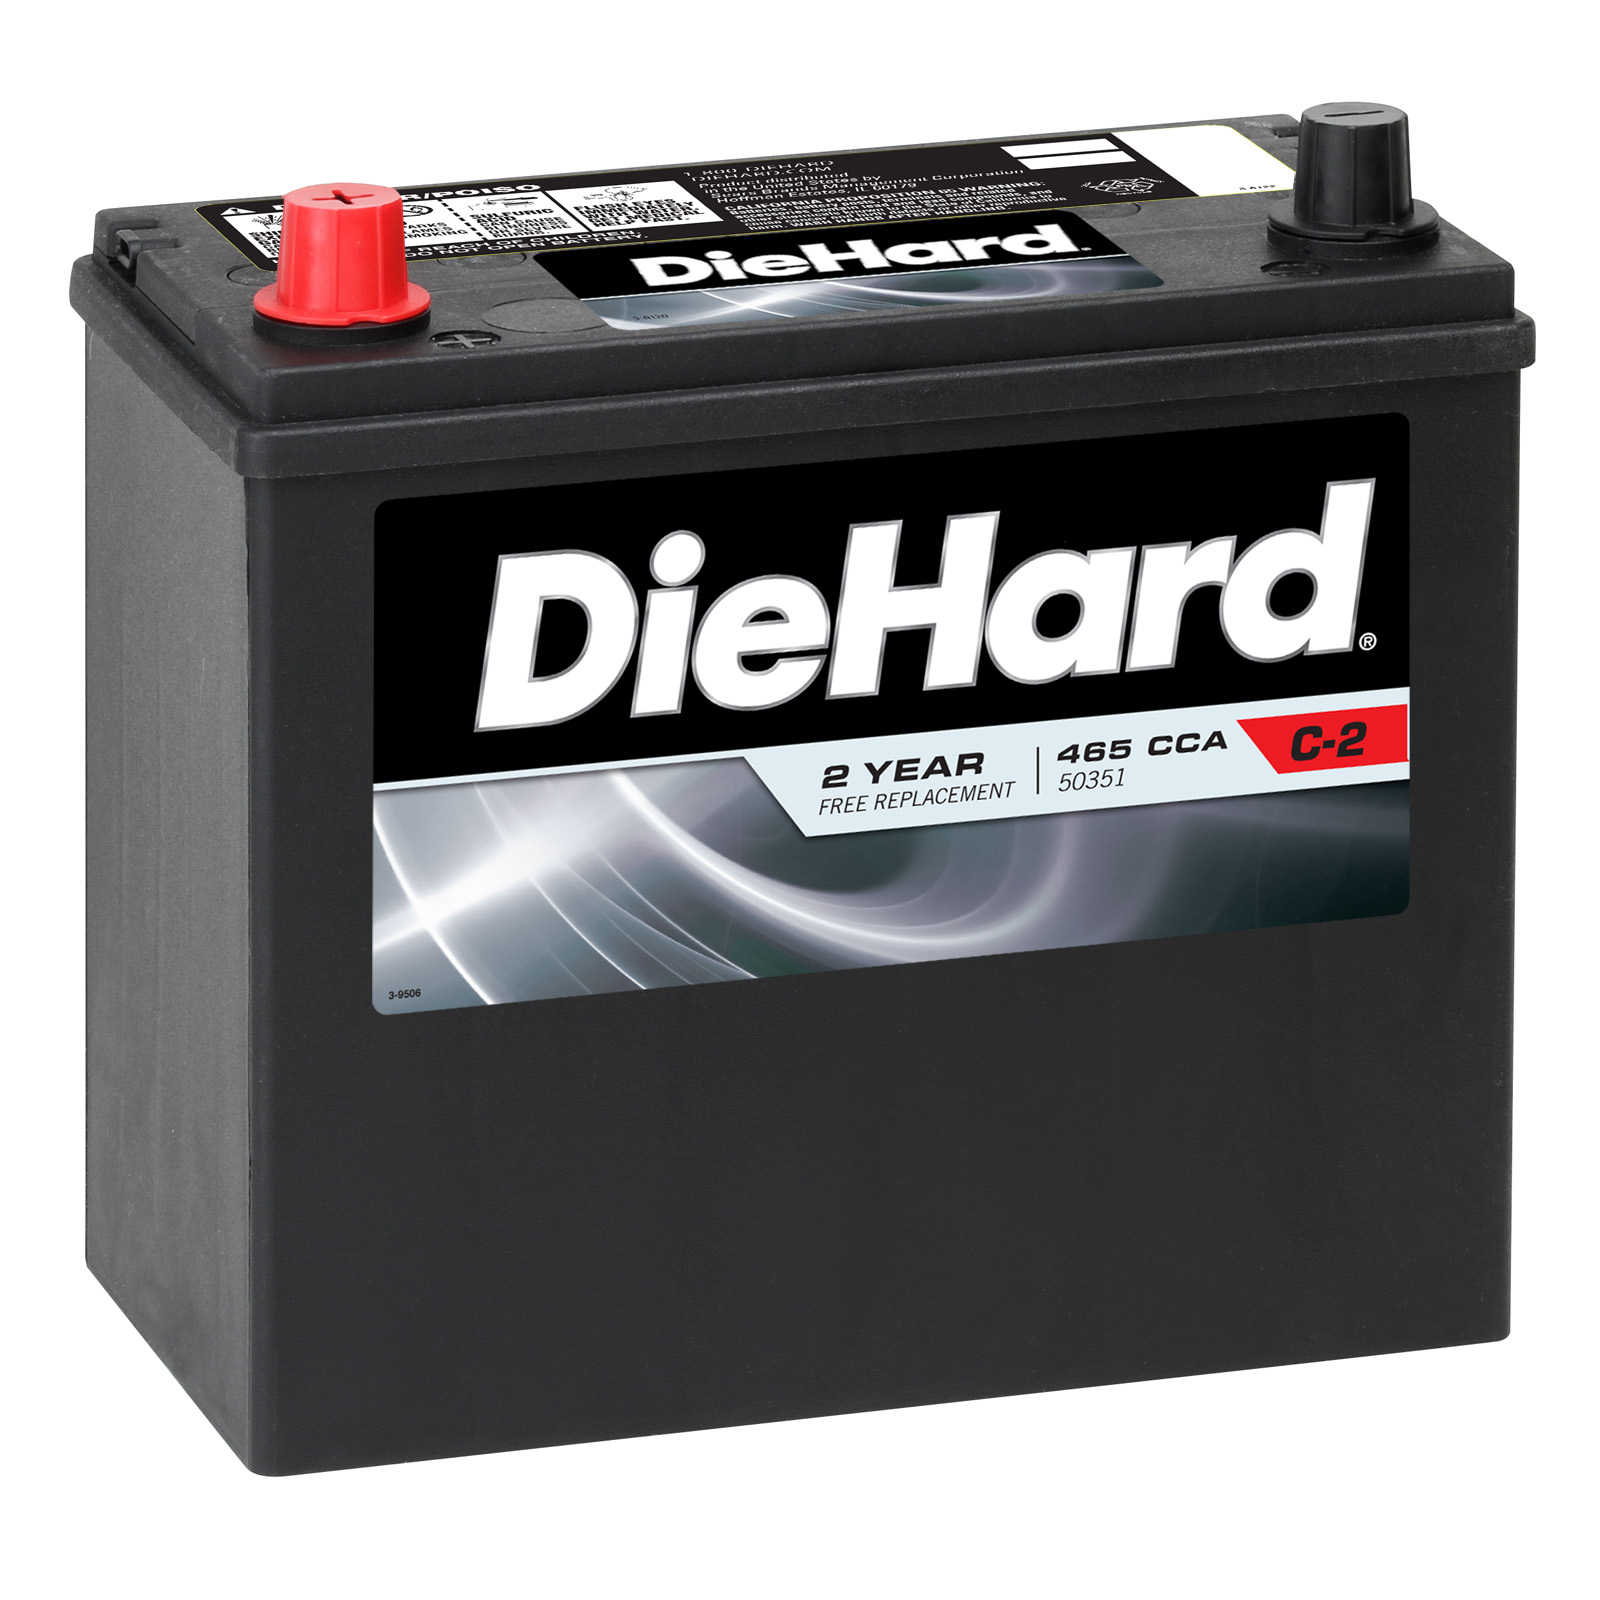 DieHard Automotive Battery - Group Size EP-51 (Price with Exchange)